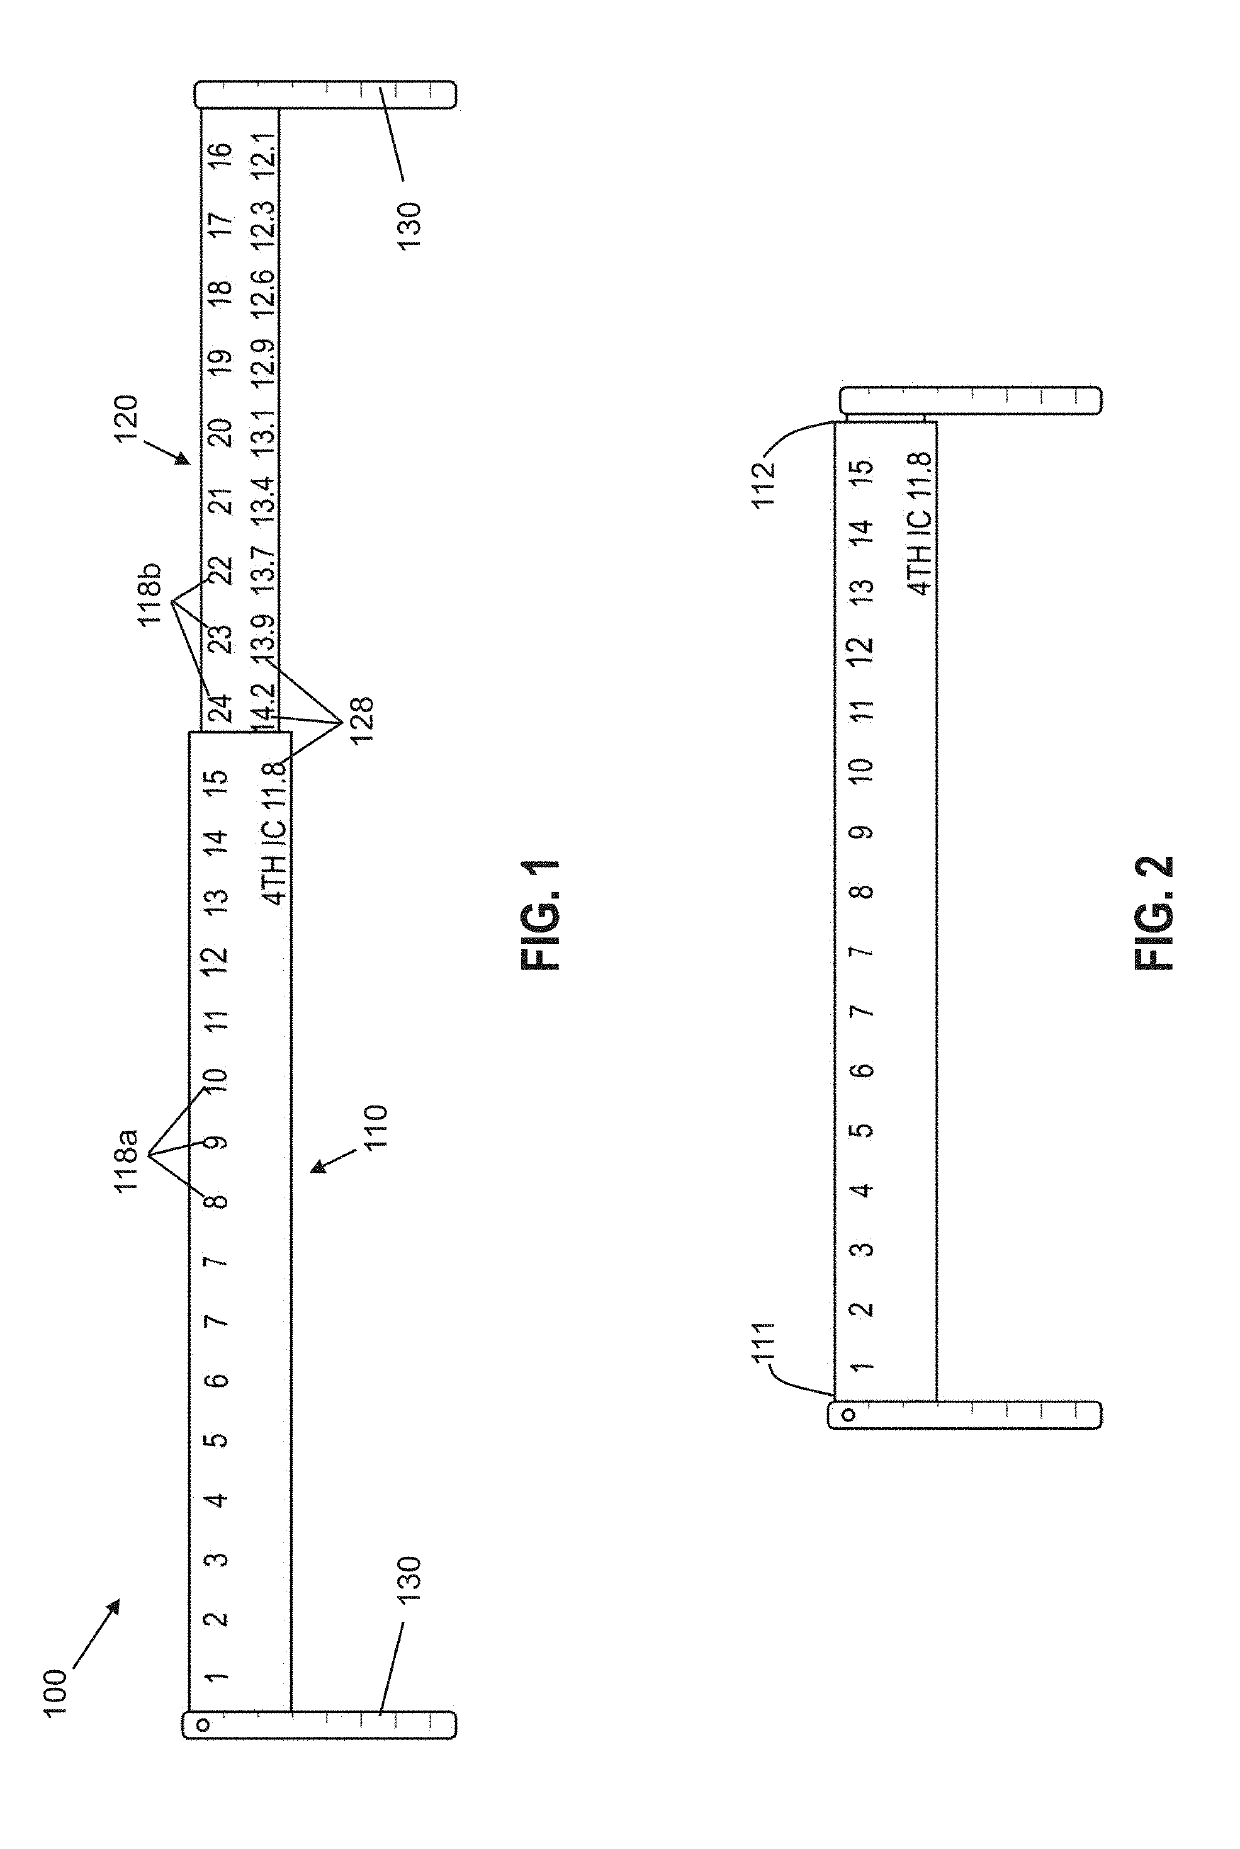 Methods and devices for placement of electrocardiogram leads